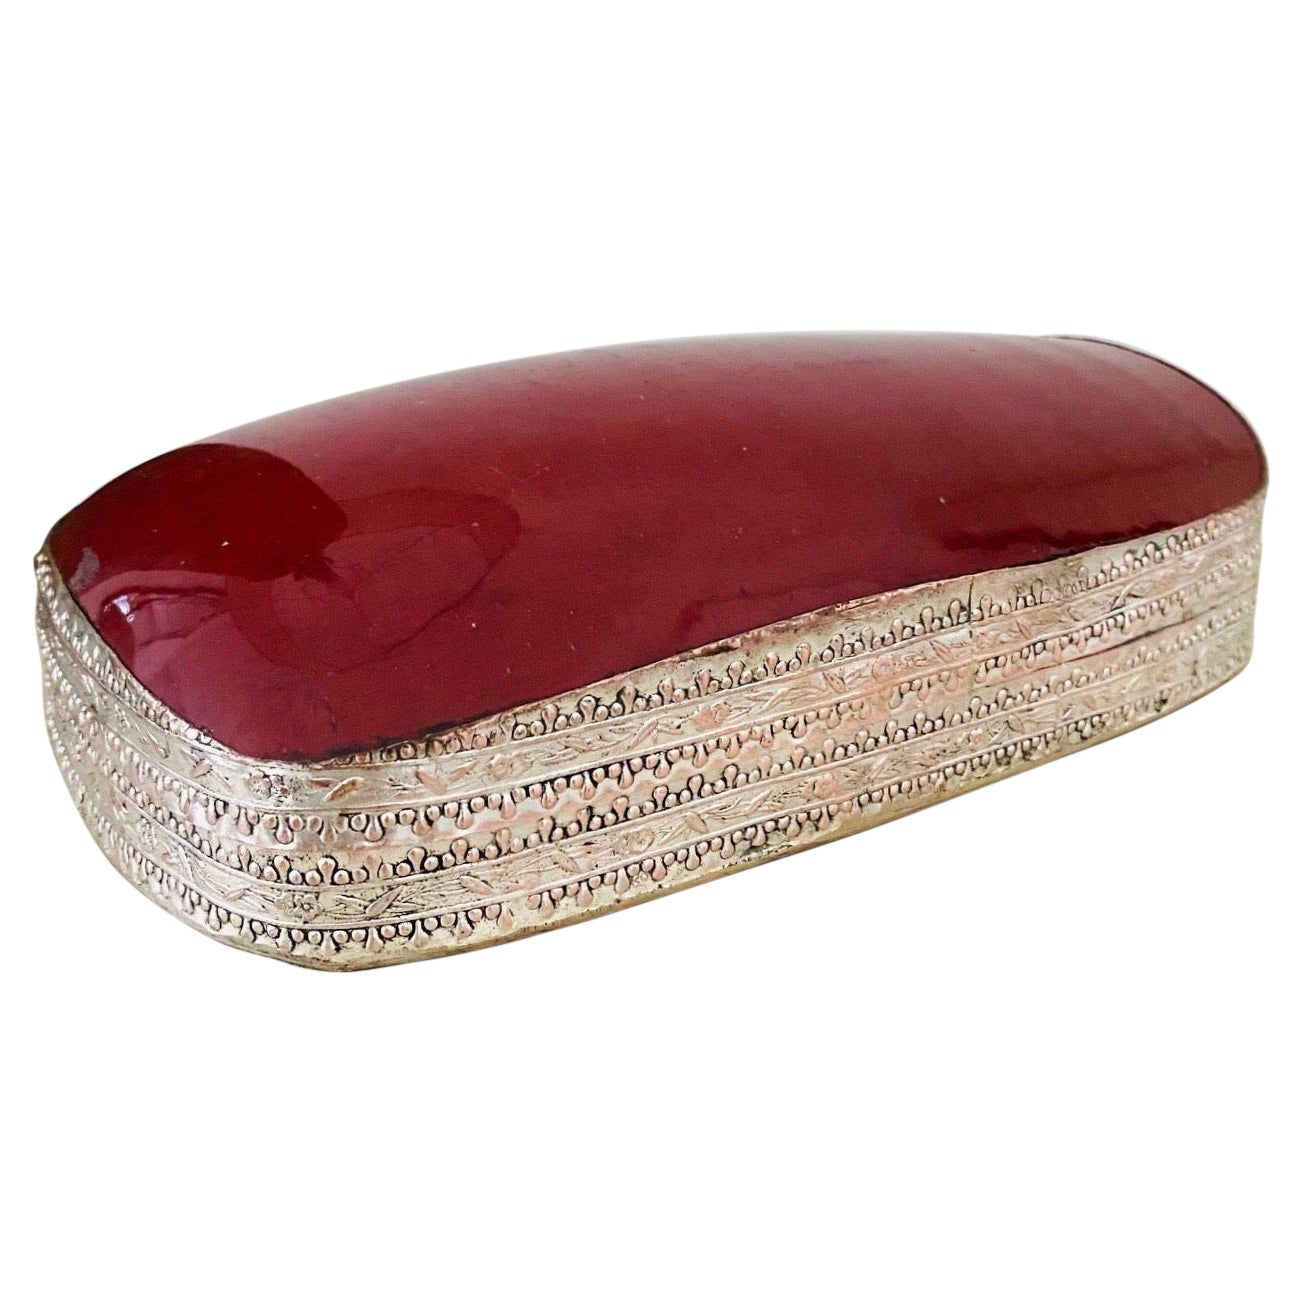 Silver Trinket Box with Antique Oxblood Porcelain Inset, Chinese circa 1945